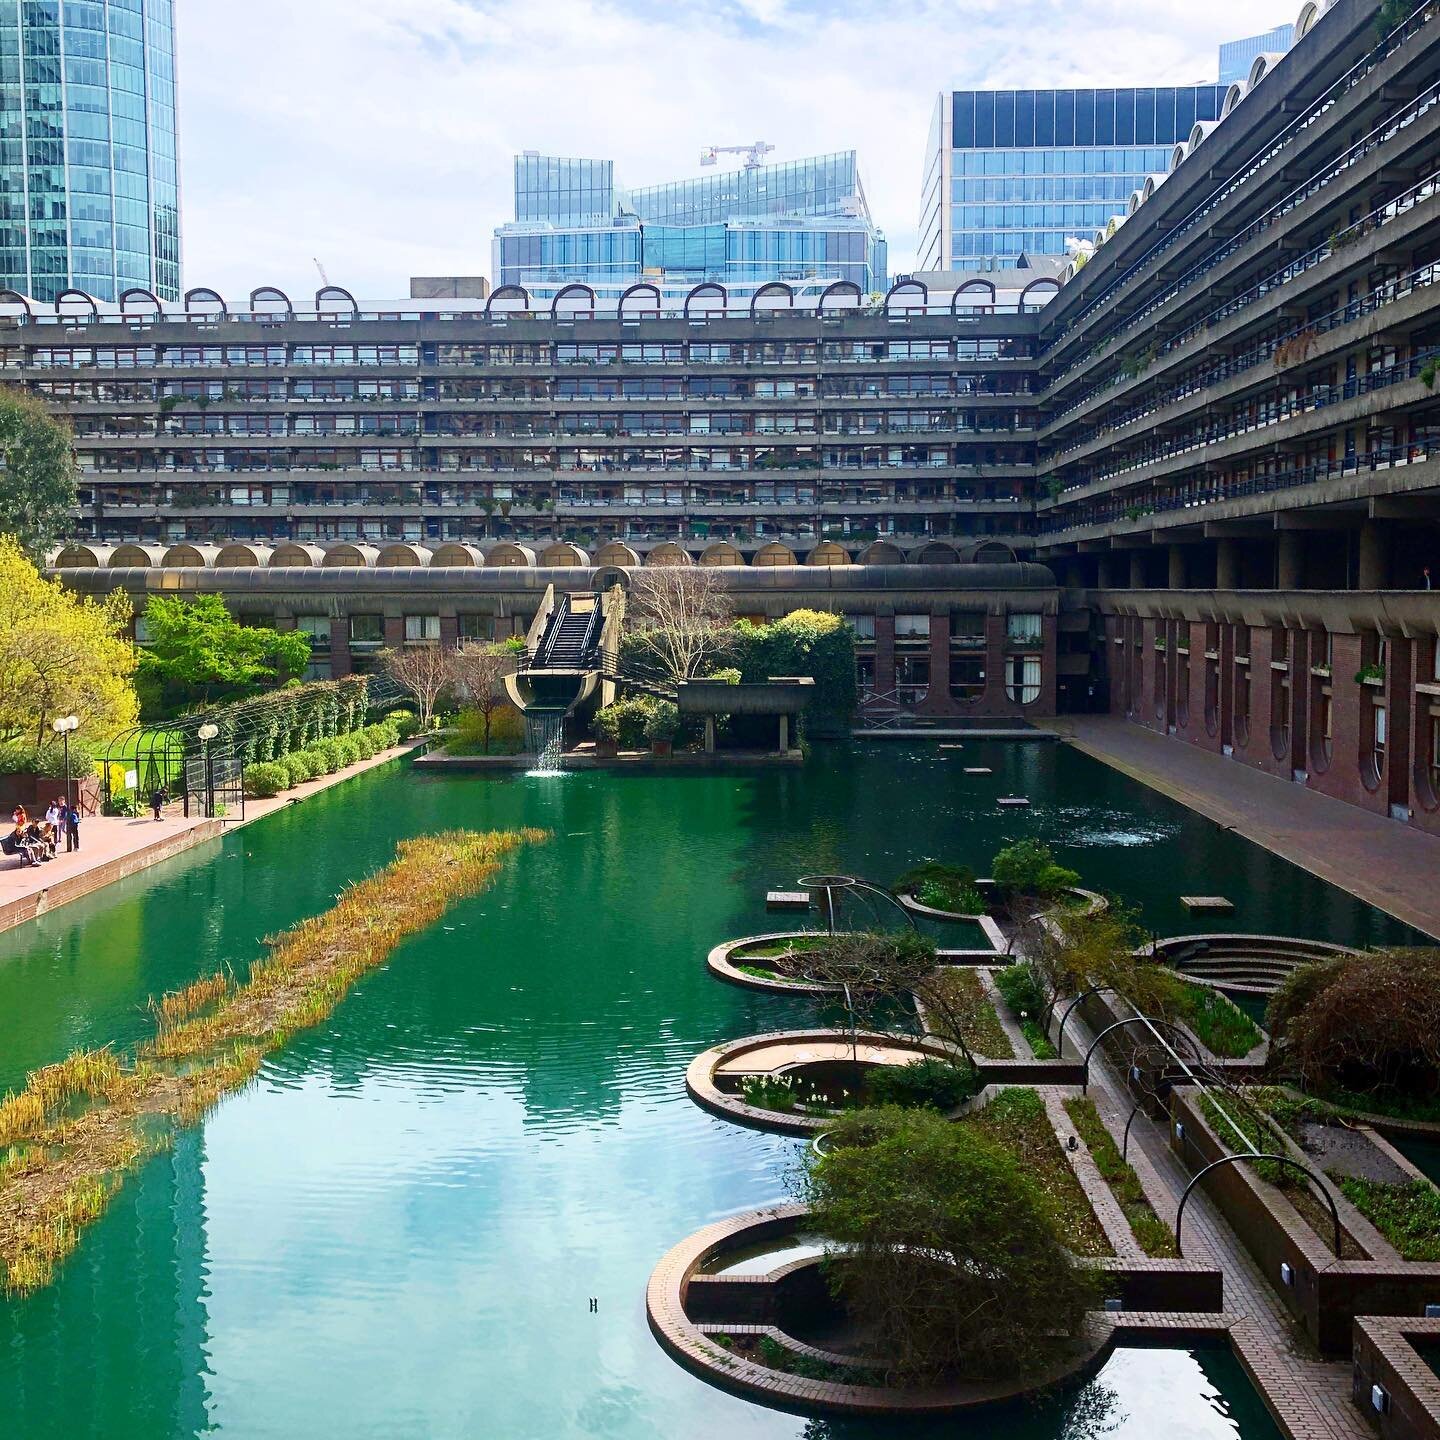 Balance: concrete / greenery / water 
- - -
#throwback #tbt #london #travel #babies #travelswithbaby #barbican #morningwalk #stroll #brutalism #brutalistarchitecture #brutalist #barbicanestate #concrete #startthemyoung #barbican